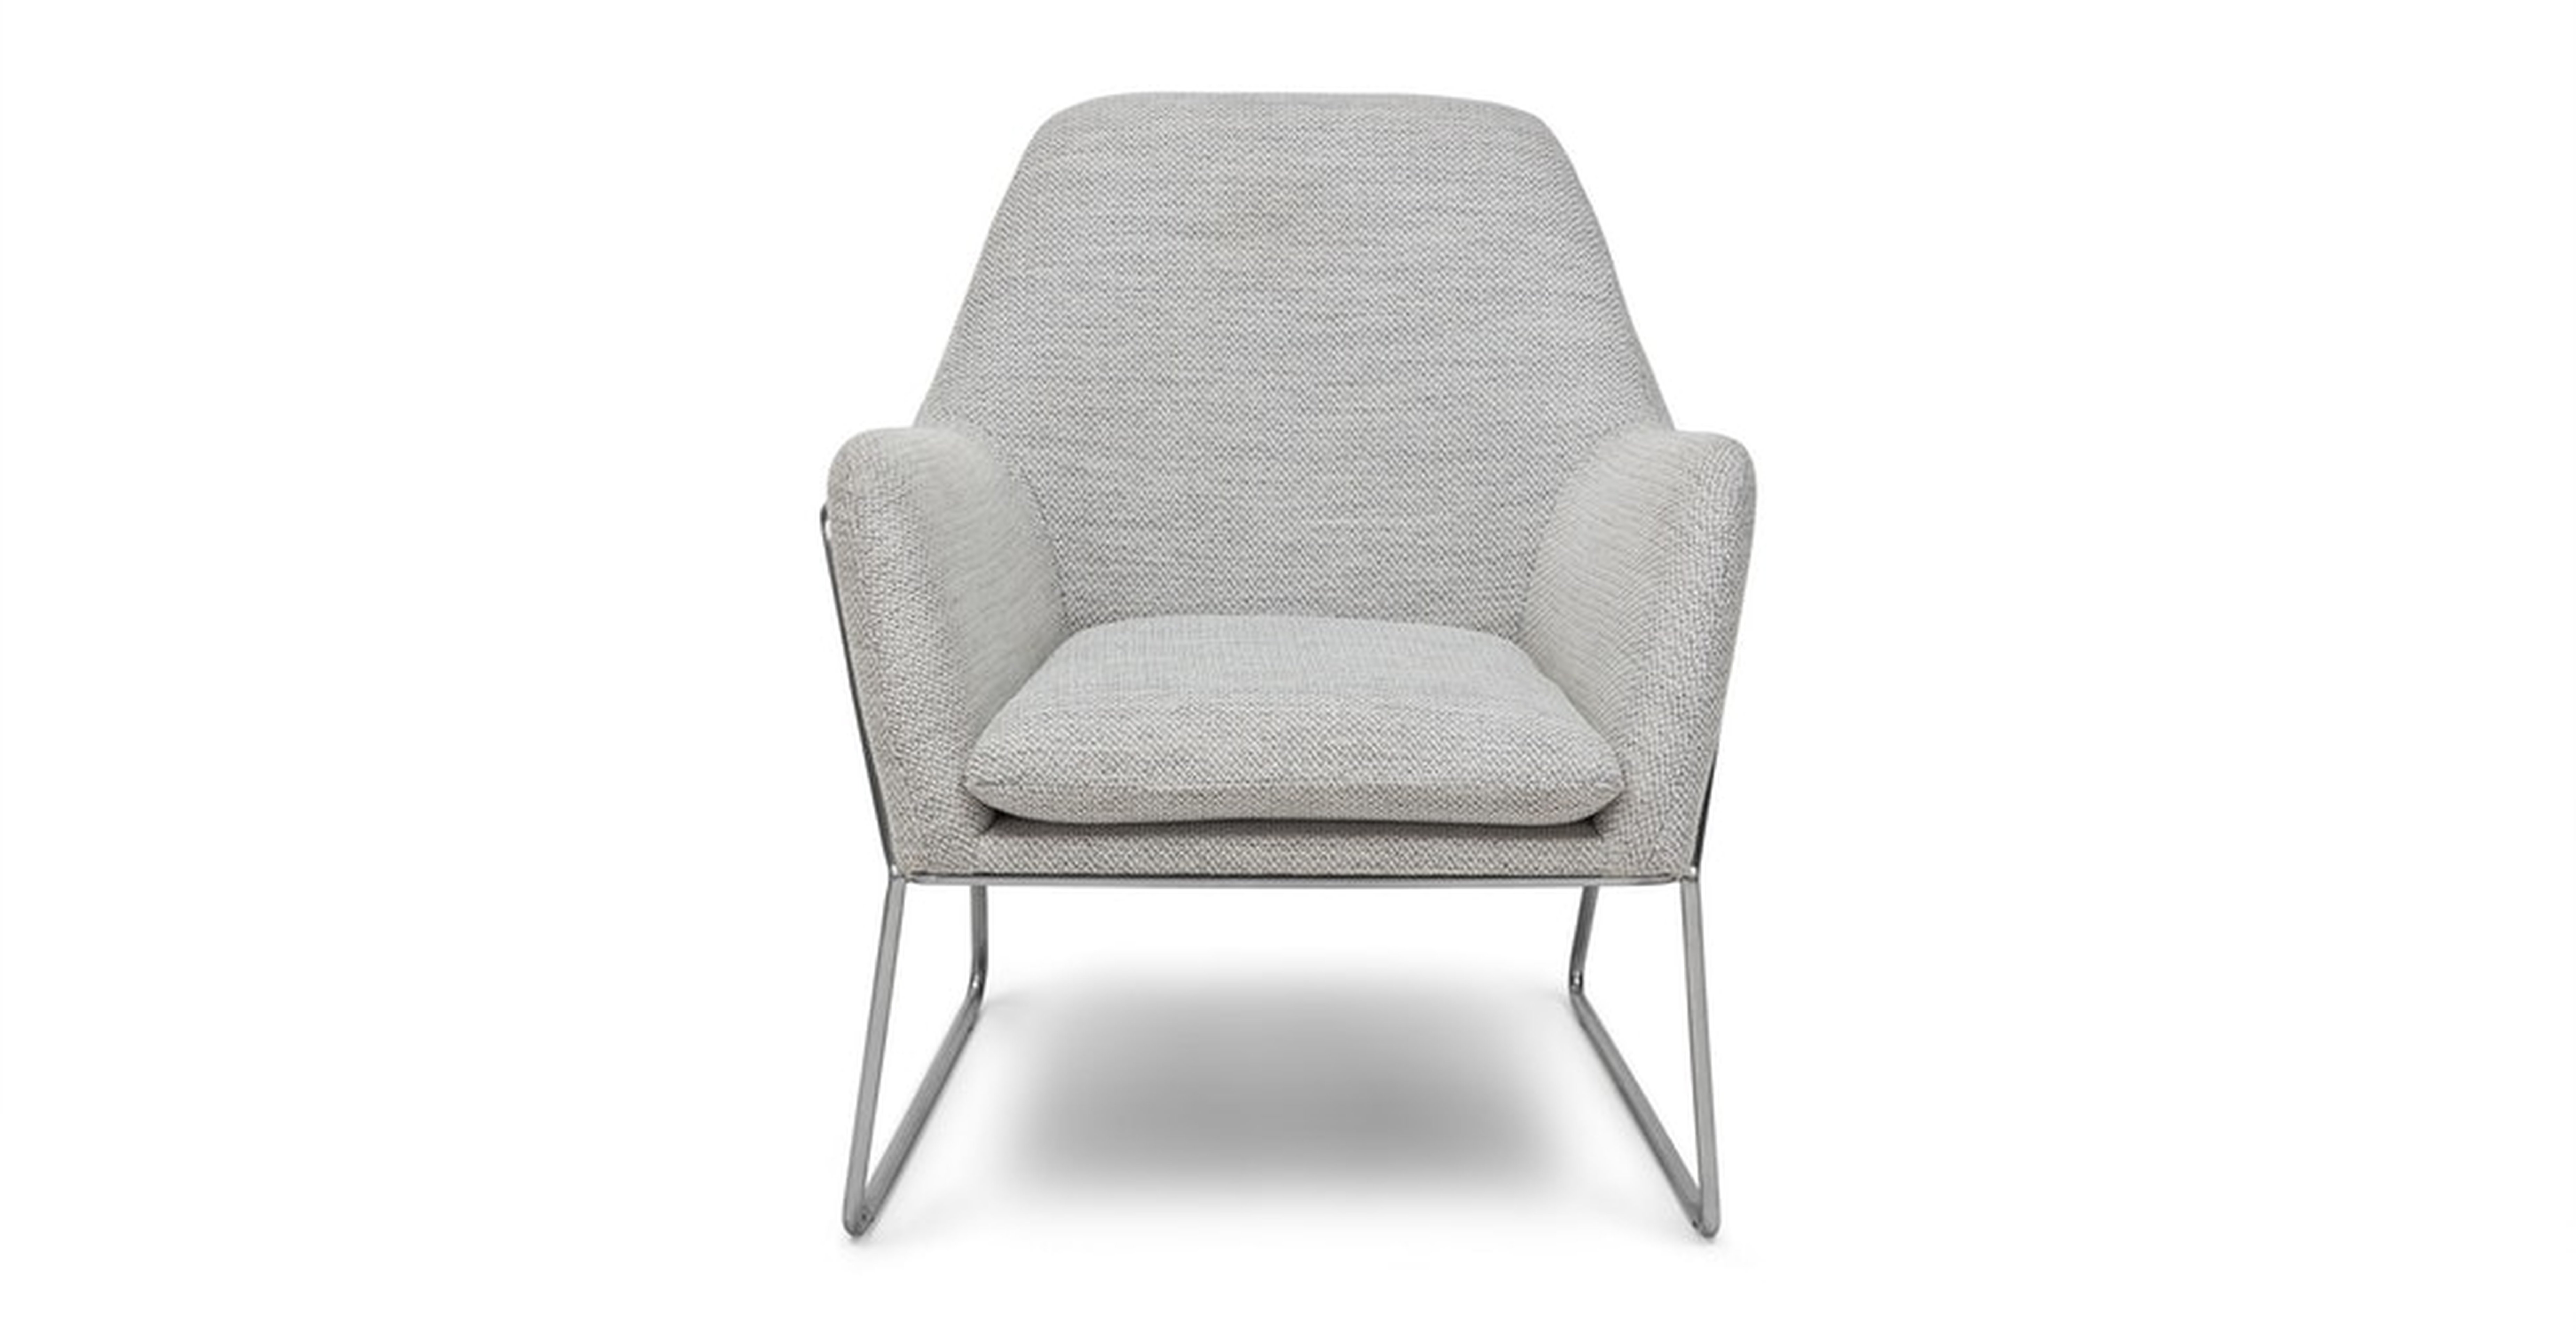 Forma Galaxy Gray Chair - Article